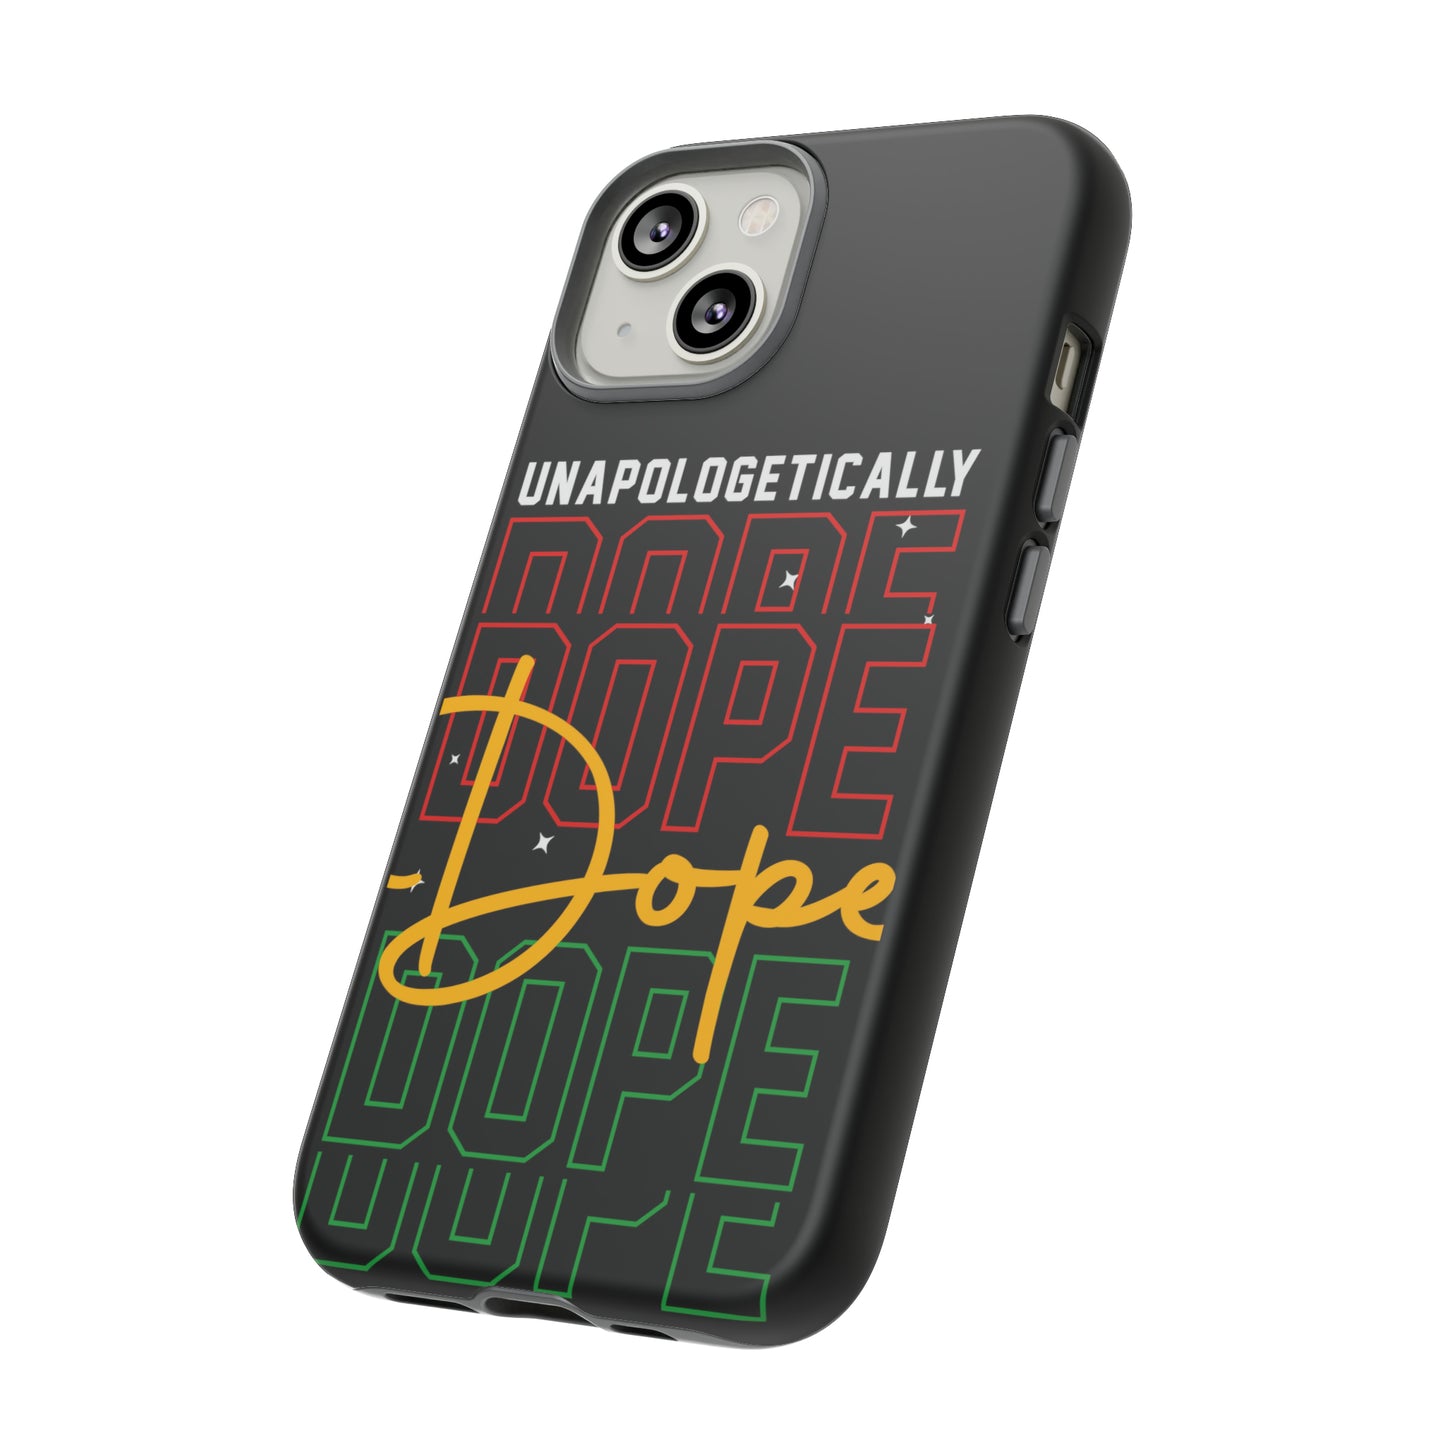 Unapologetically Dope Tough Phone Cases